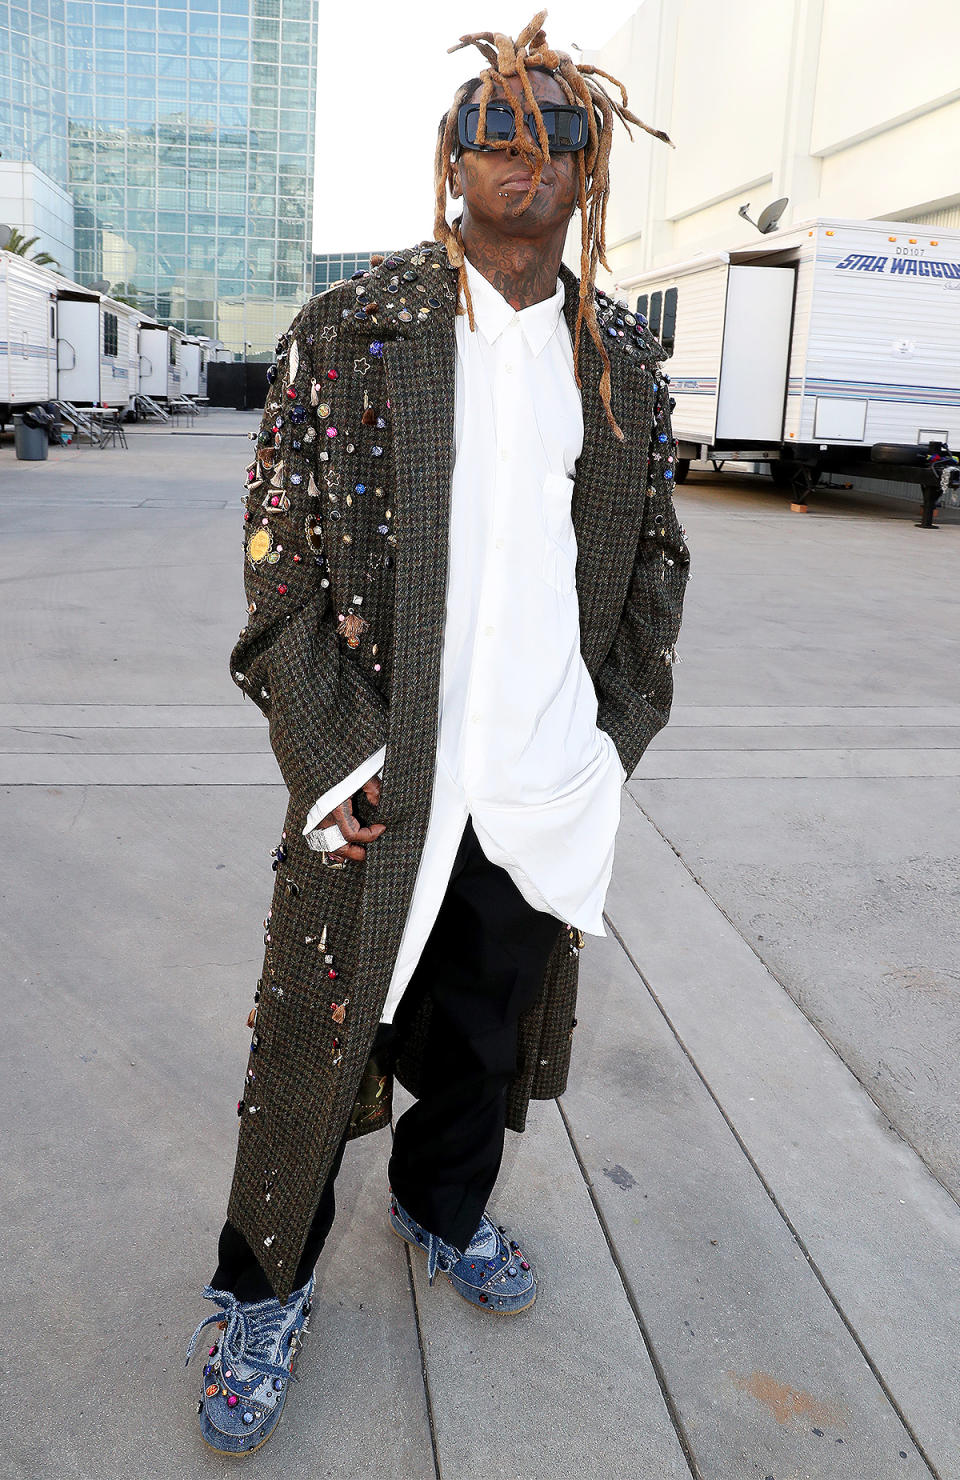 Lil Wayne Opts for an Embellished Coat & Shoes